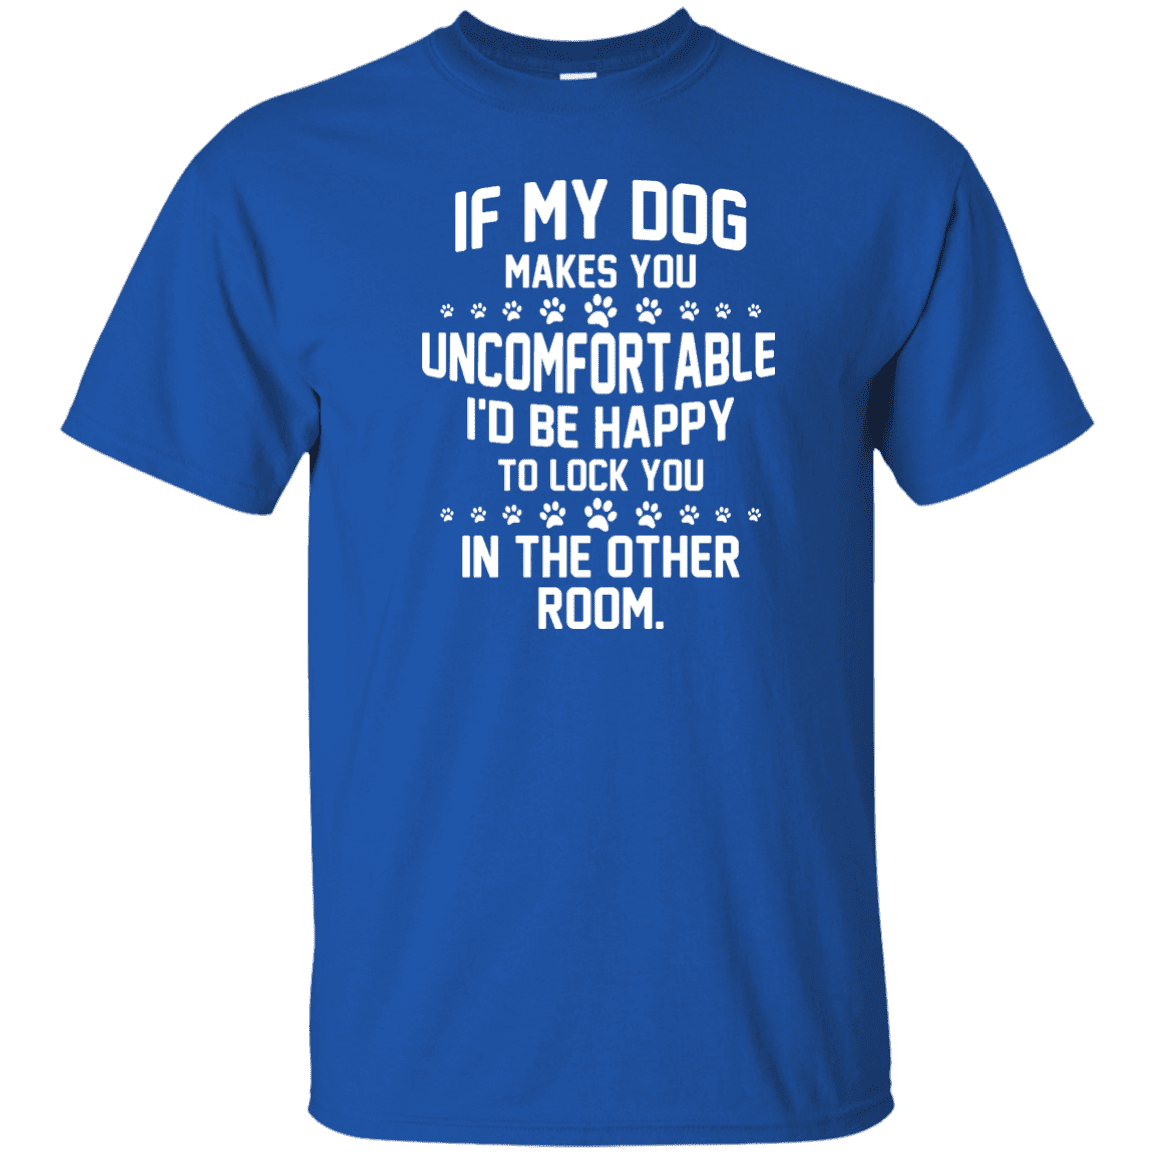 If My Dog Makes You Uncomfortable - T Shirt – Rescuers Club